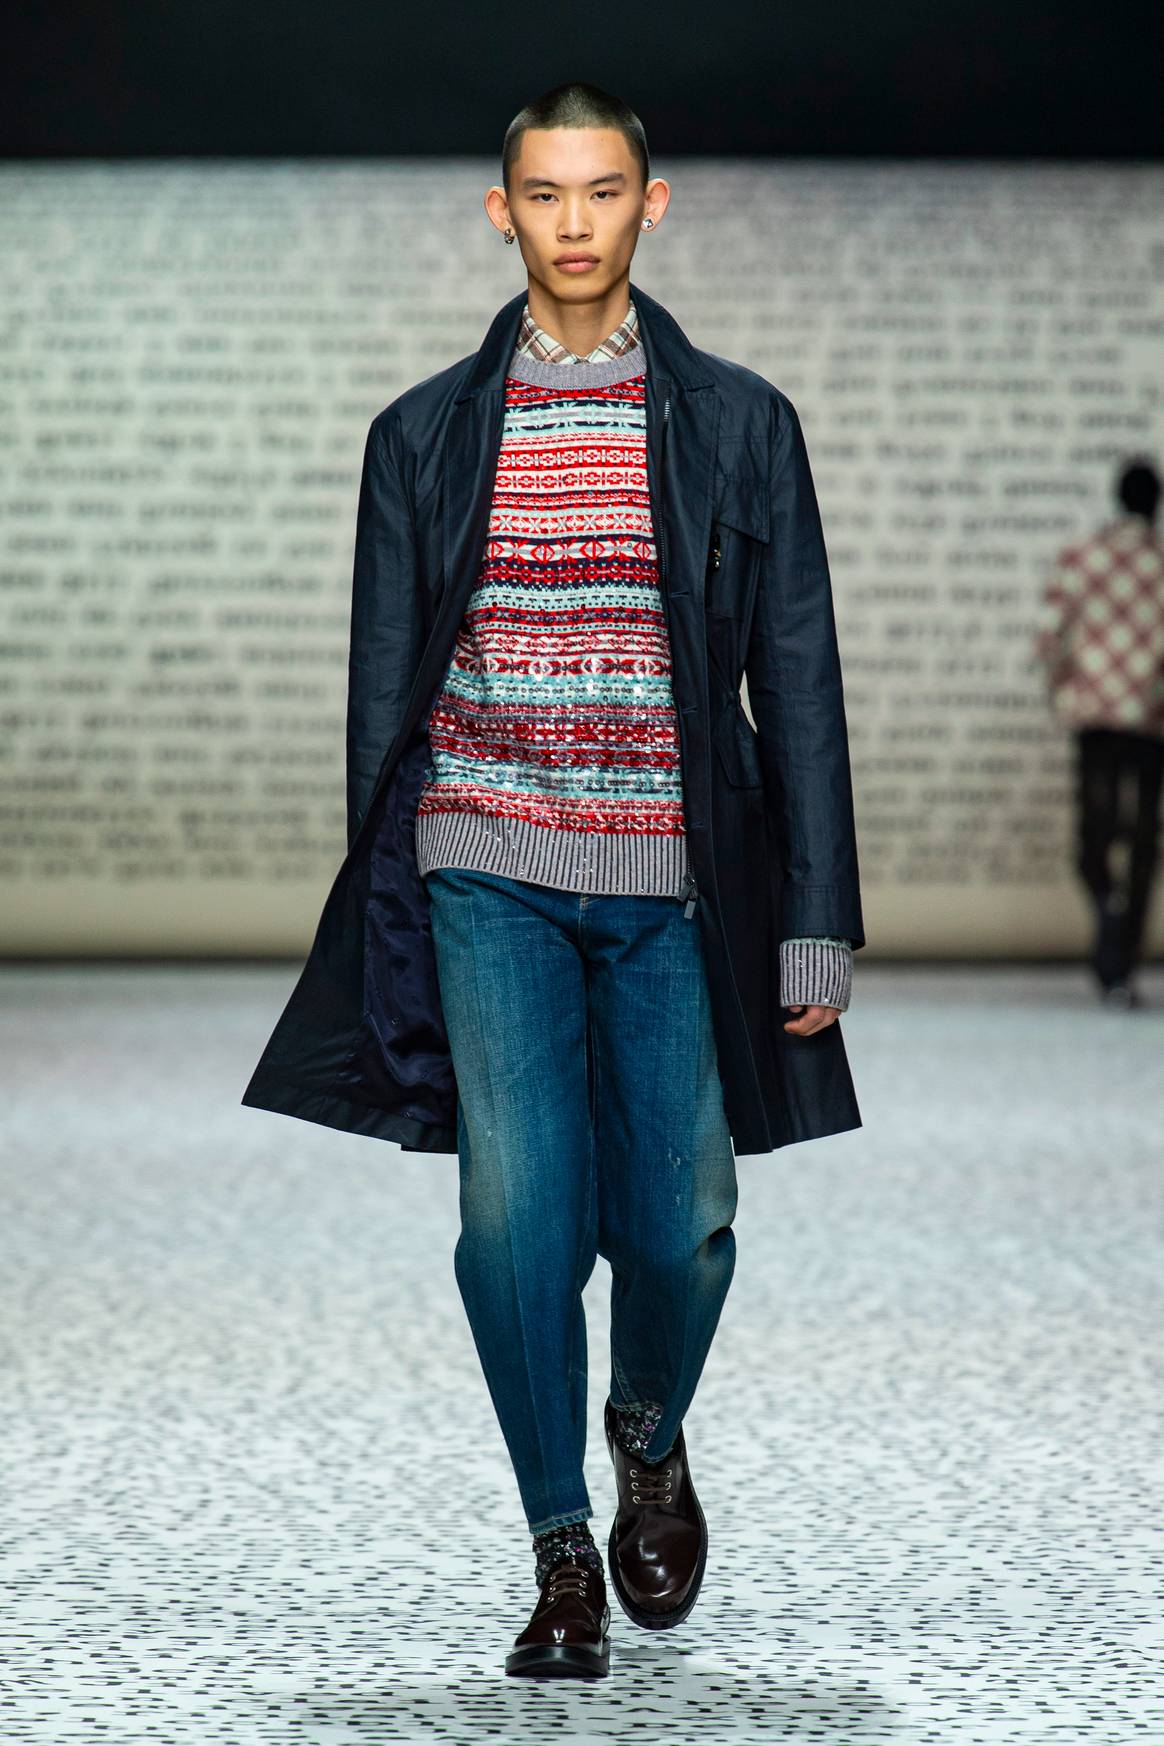 Dior Homme FW22/Catwalk Pictures